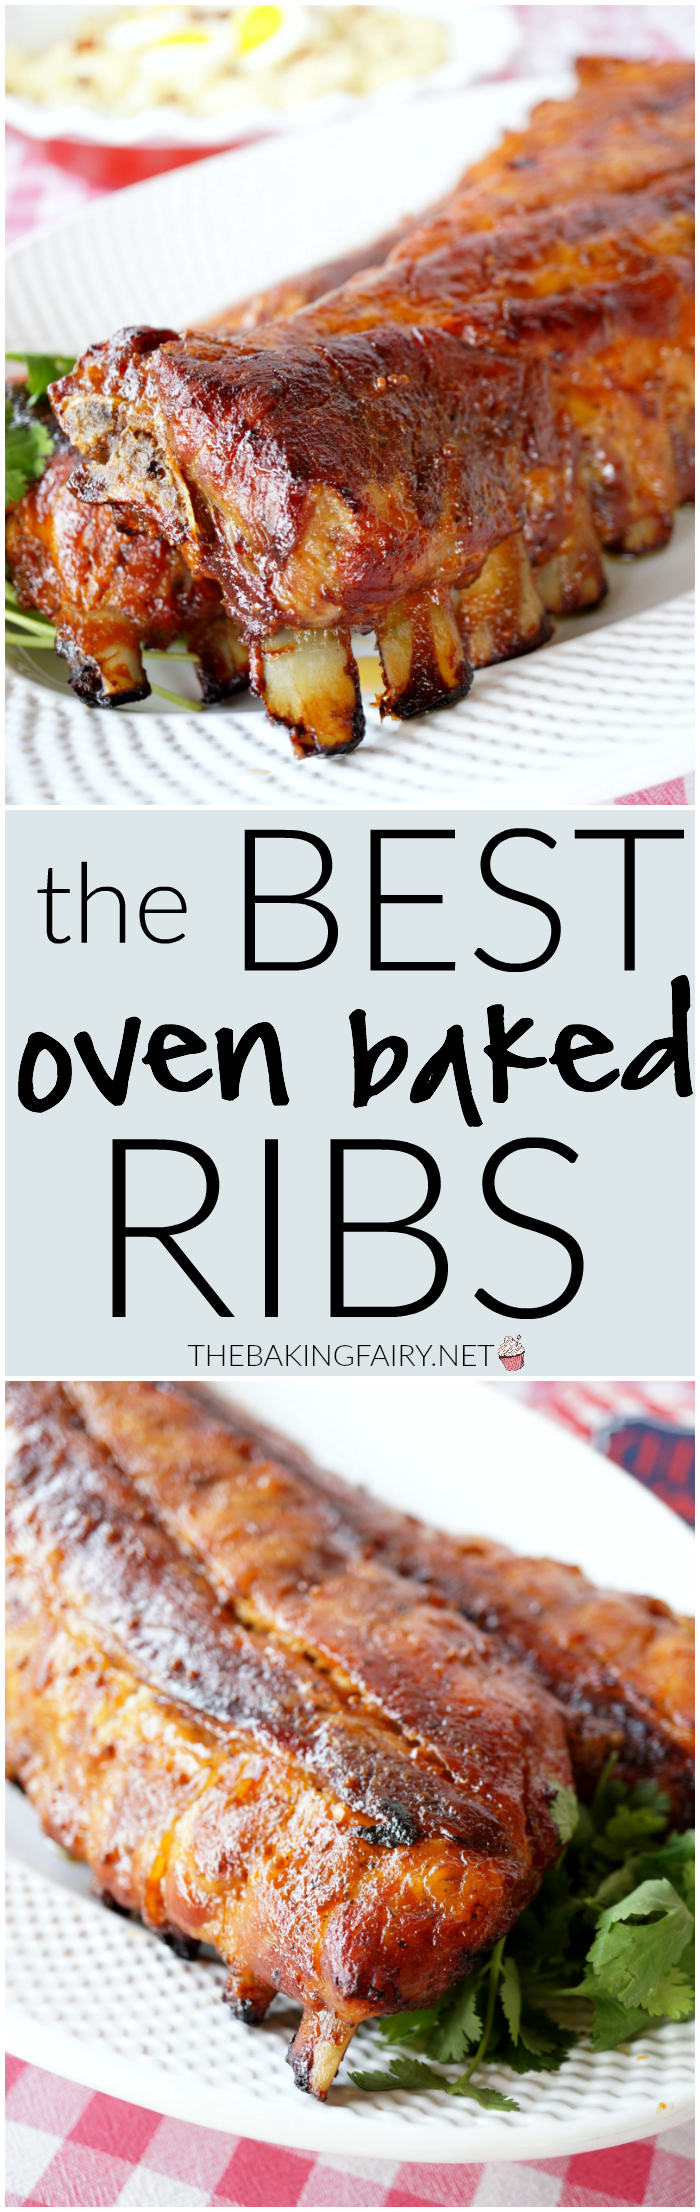 oven baked ribs | The Baking Fairy